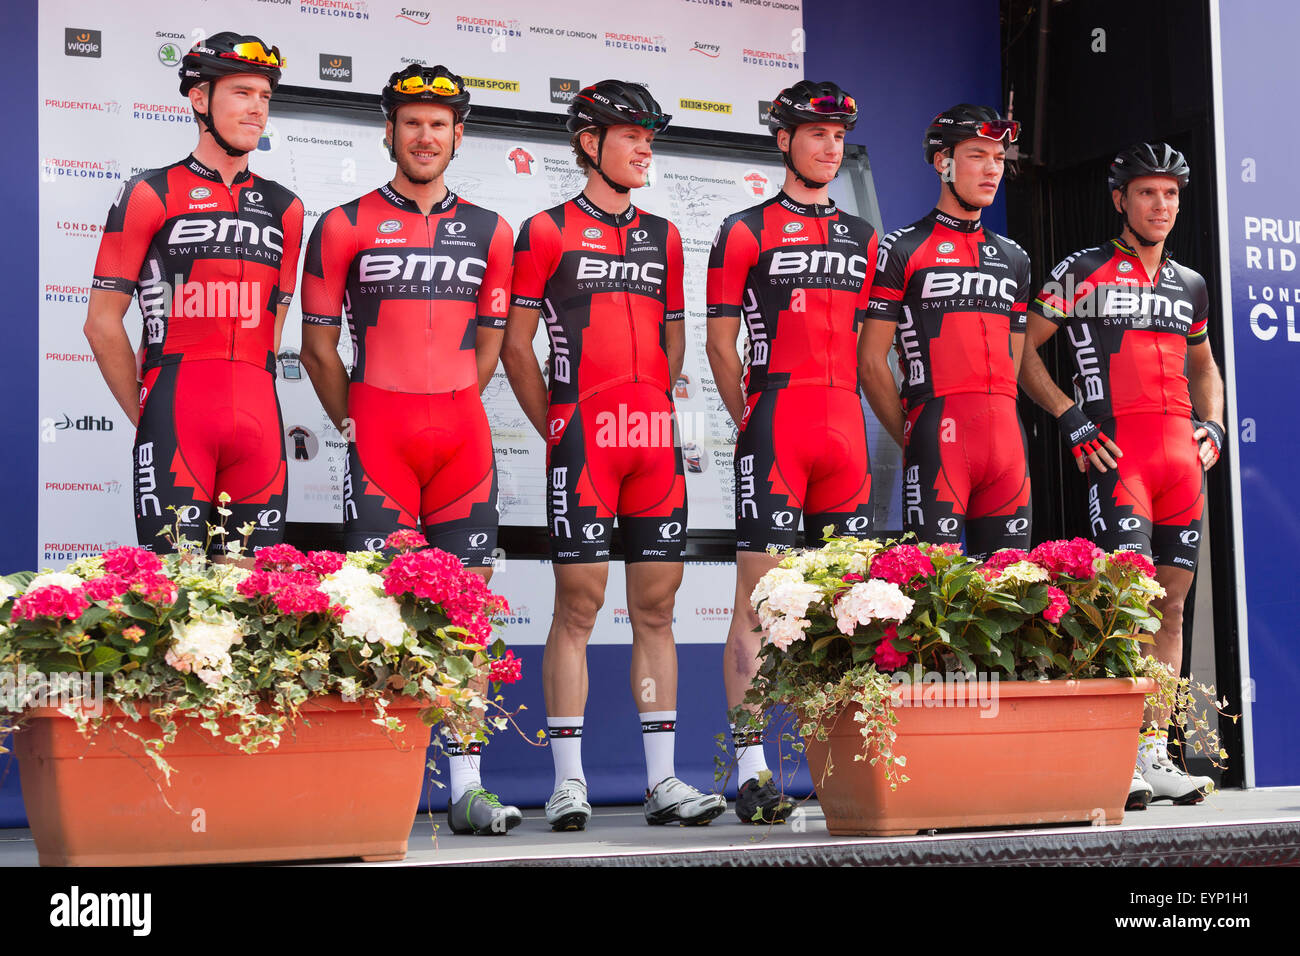 London, UK. 2 August 2015. Prudential RideLondon 2015. The BMC Racing Team before the start of the London-Surrey Classic race in Horse Guards Parade. Photo: OnTheRoad/Alamy Live News Stock Photo